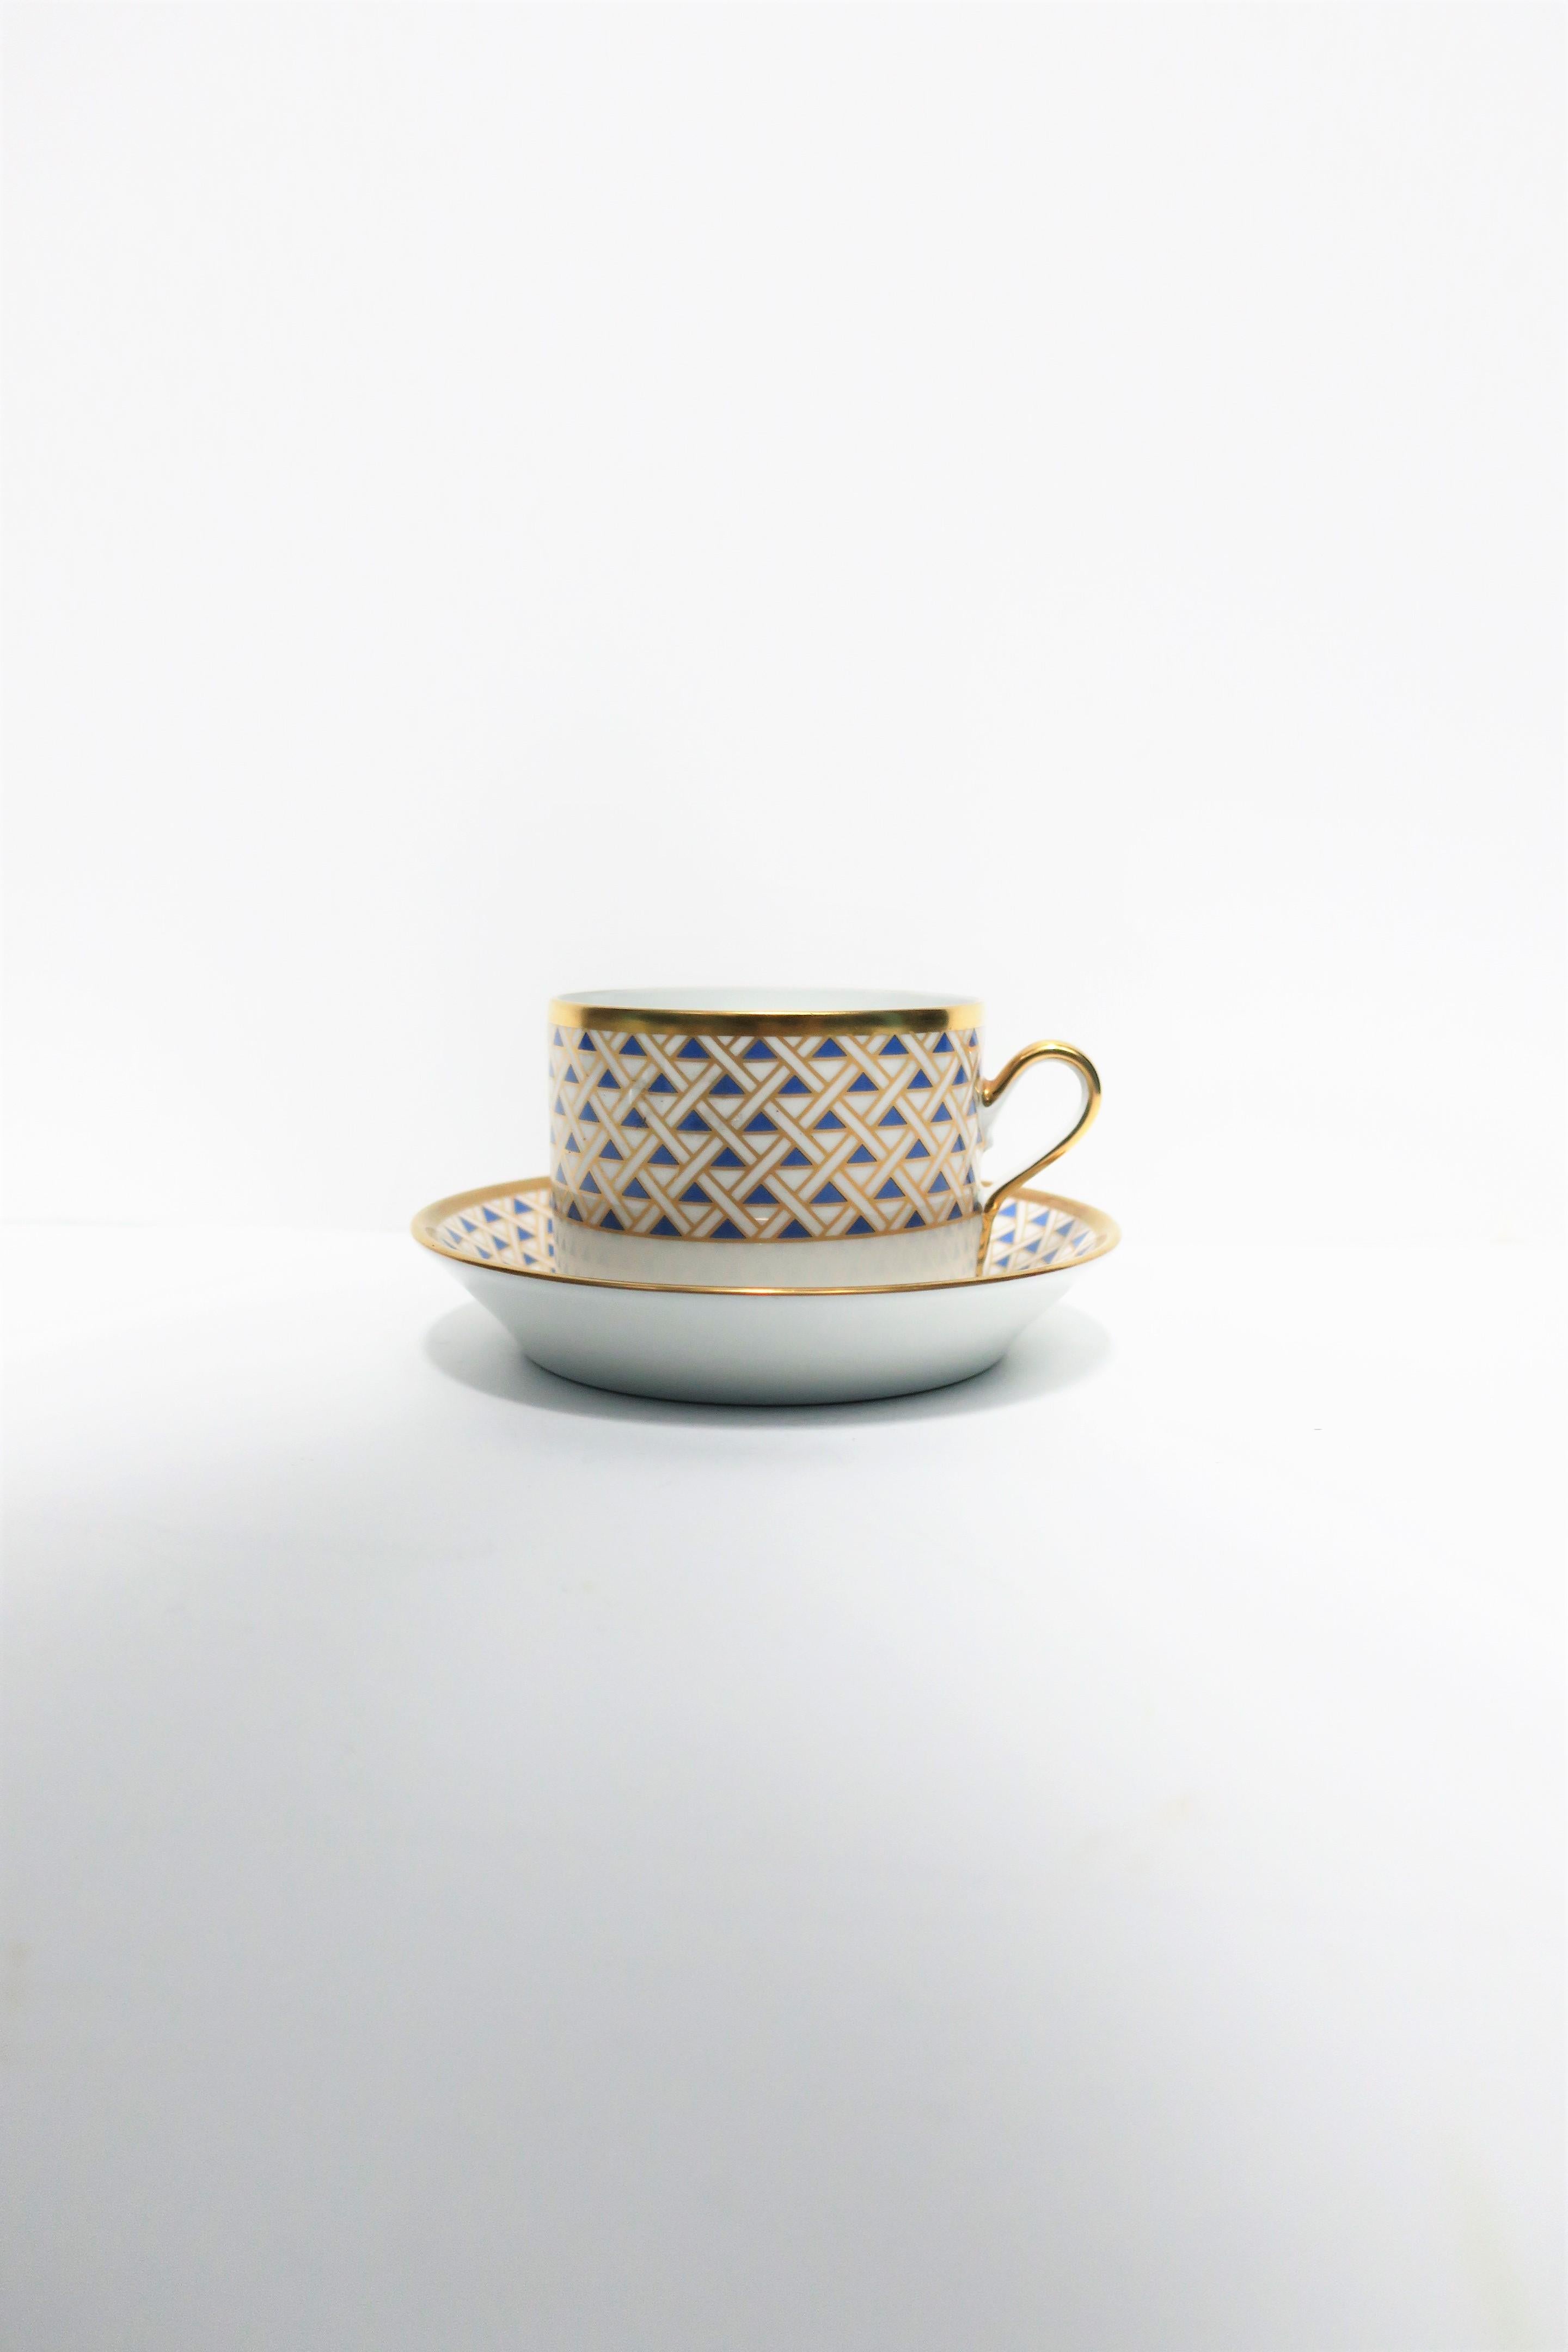 A very beautiful vintage Italian white porcelain, blue, and gold, coffee or tea cup and saucer by designer Richard Ginori, circa 20th century, Italy. Colors include, blue, gold, on white porcelain. With maker's mark on bottom as show in images #15,